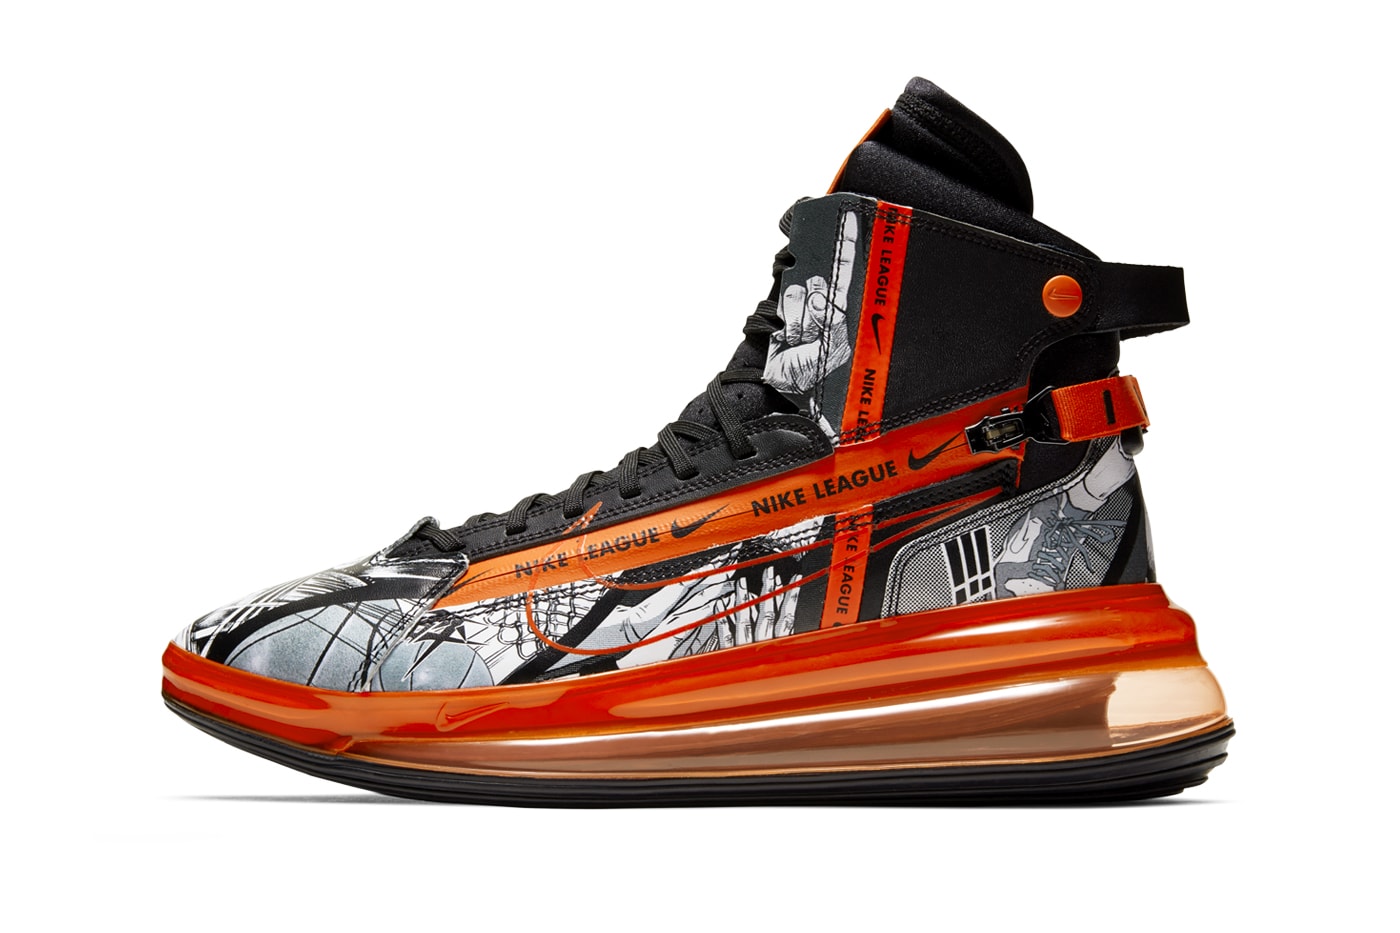 Nike Air Max 720 Saturn March Madness Release  NCAA basketball NBA sneakers shoes orange black ci1959 036 hbl high school basketball league greater china orange only once 